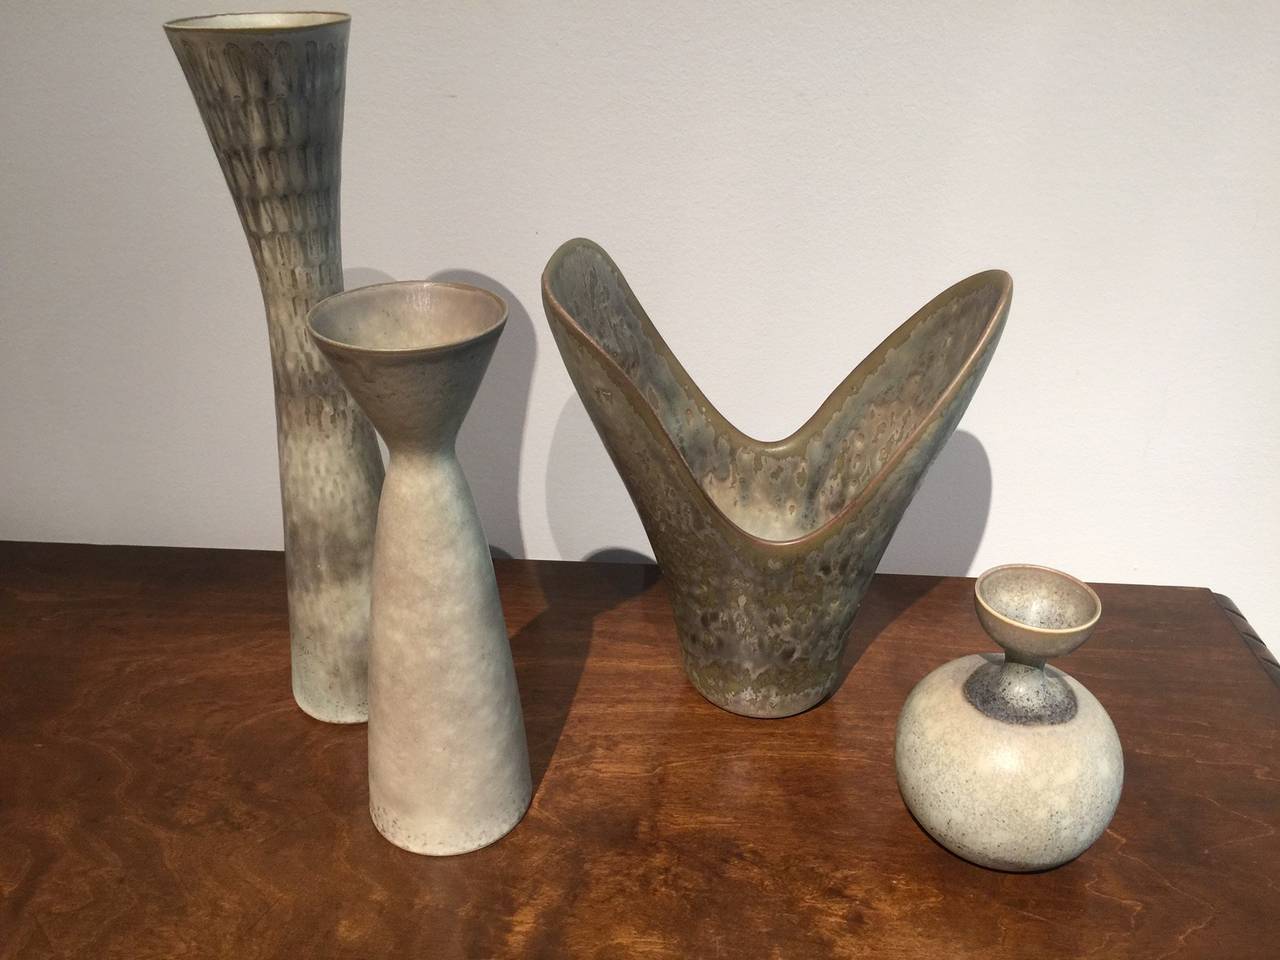 Beautiful small grouping of vases by Carl Harry Stalhane for Rörstrand, Sweden, circa 1950s. Modernist shapes in stunning grayish eggshell glazes.